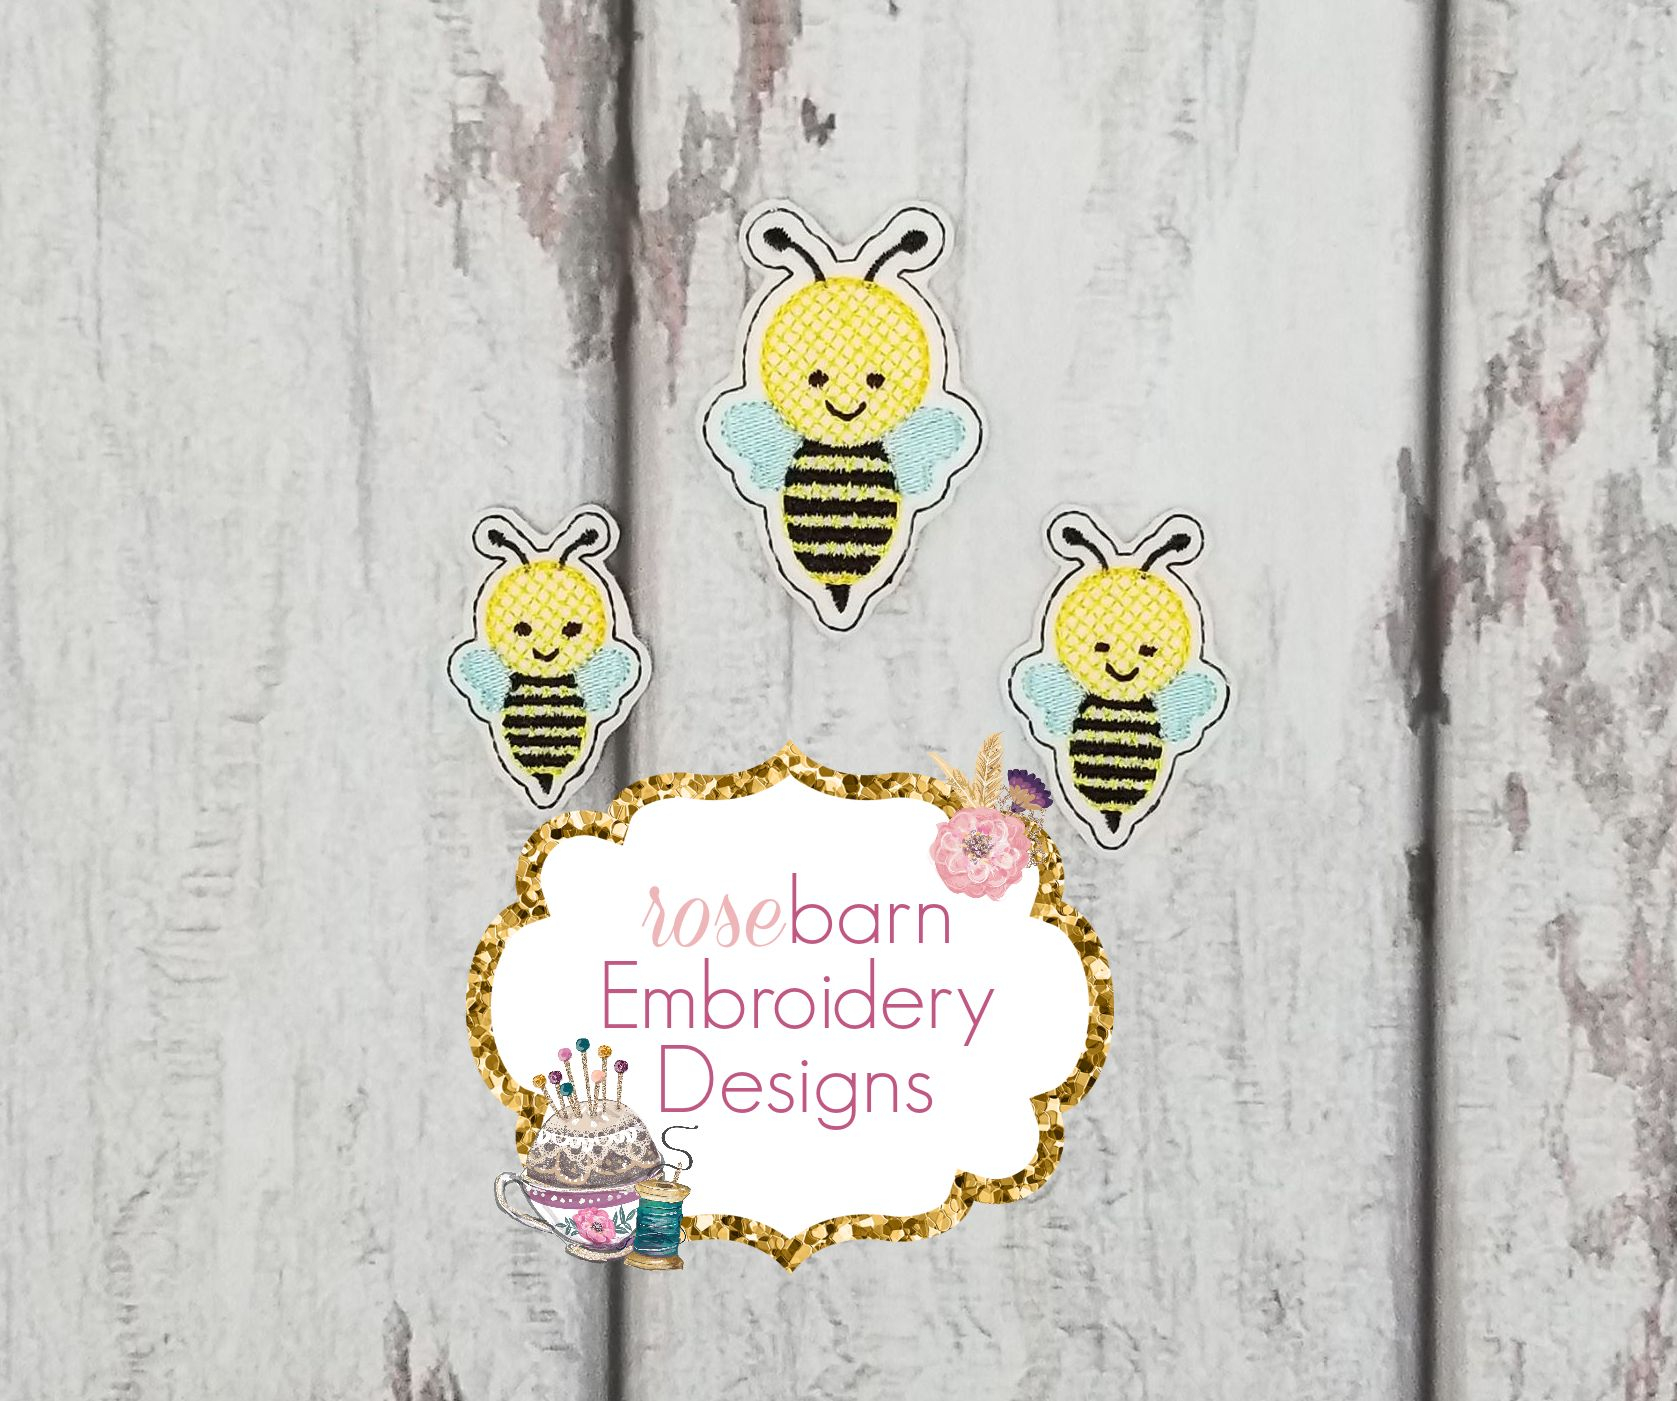 Bumble Bee Embroidery Pattern Bumblebee Fetlie